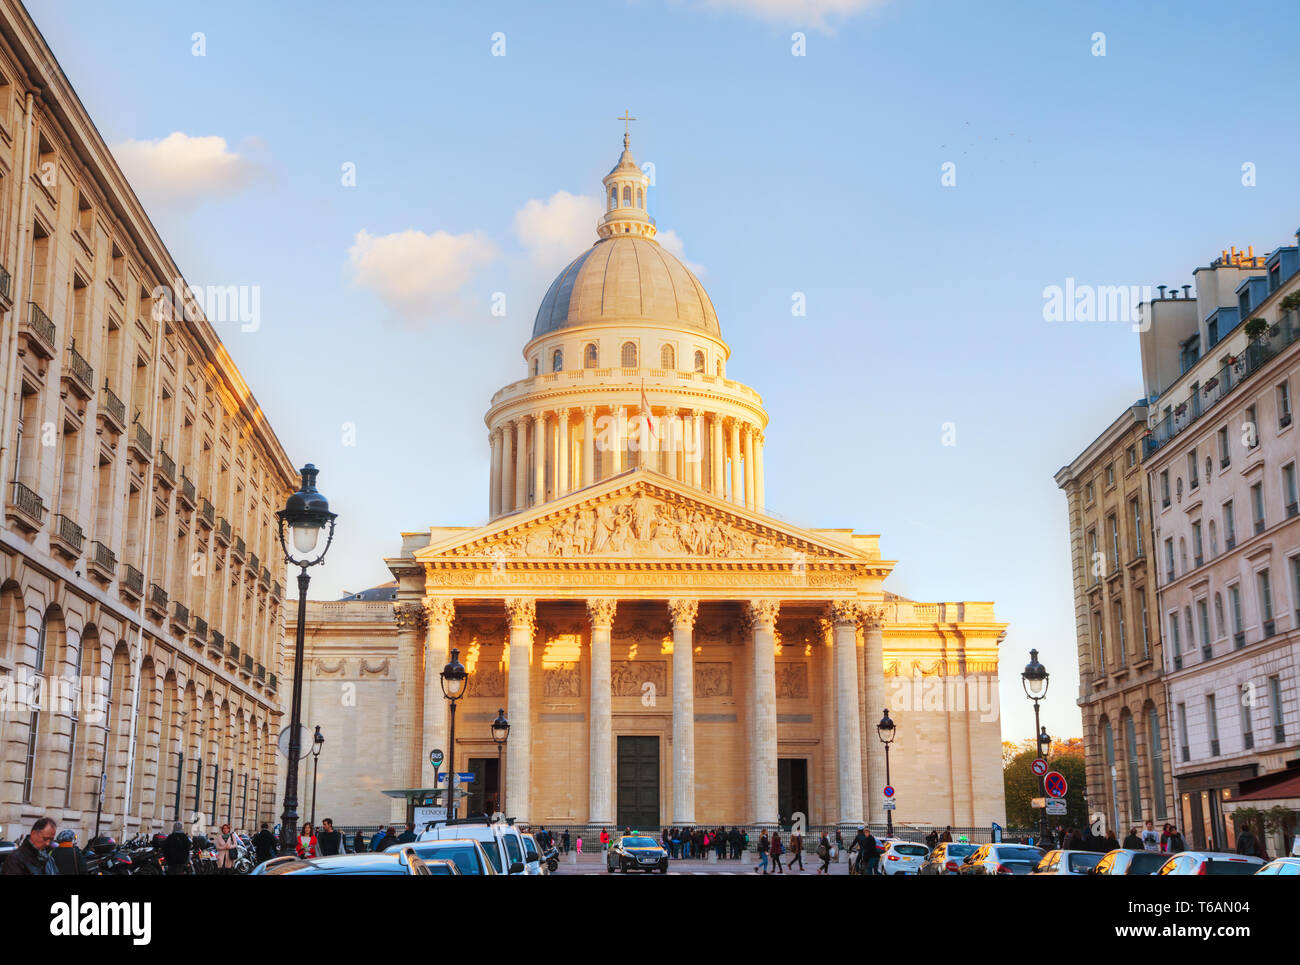 The Pantheon building in Paris, France Stock Photo